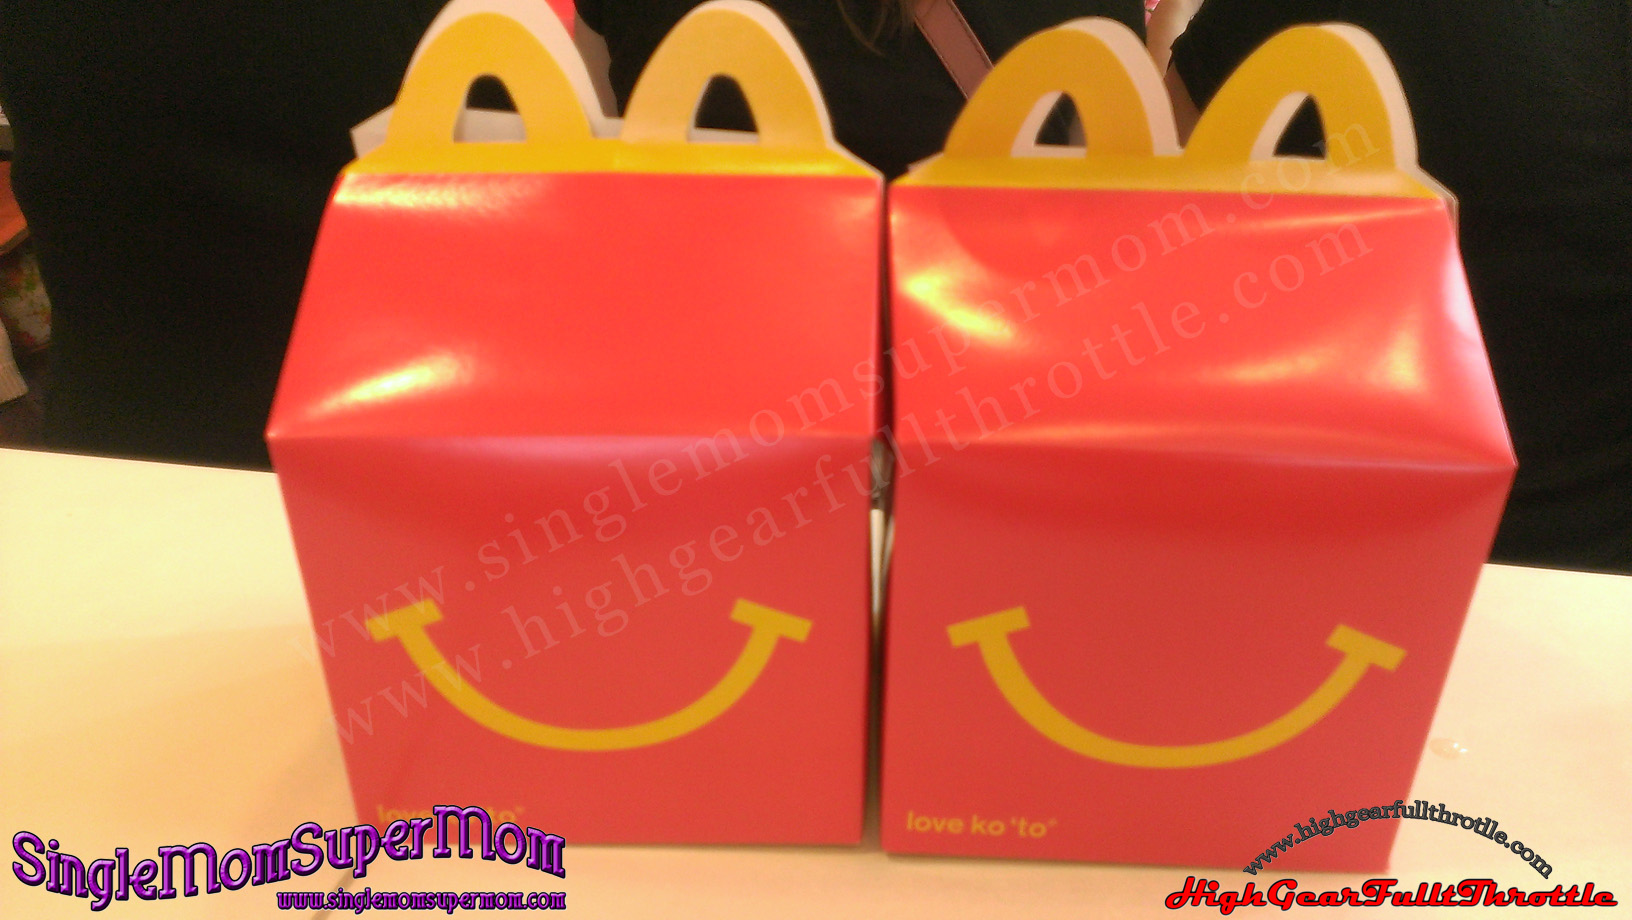 Happy Meal Box of McDonald’s is back